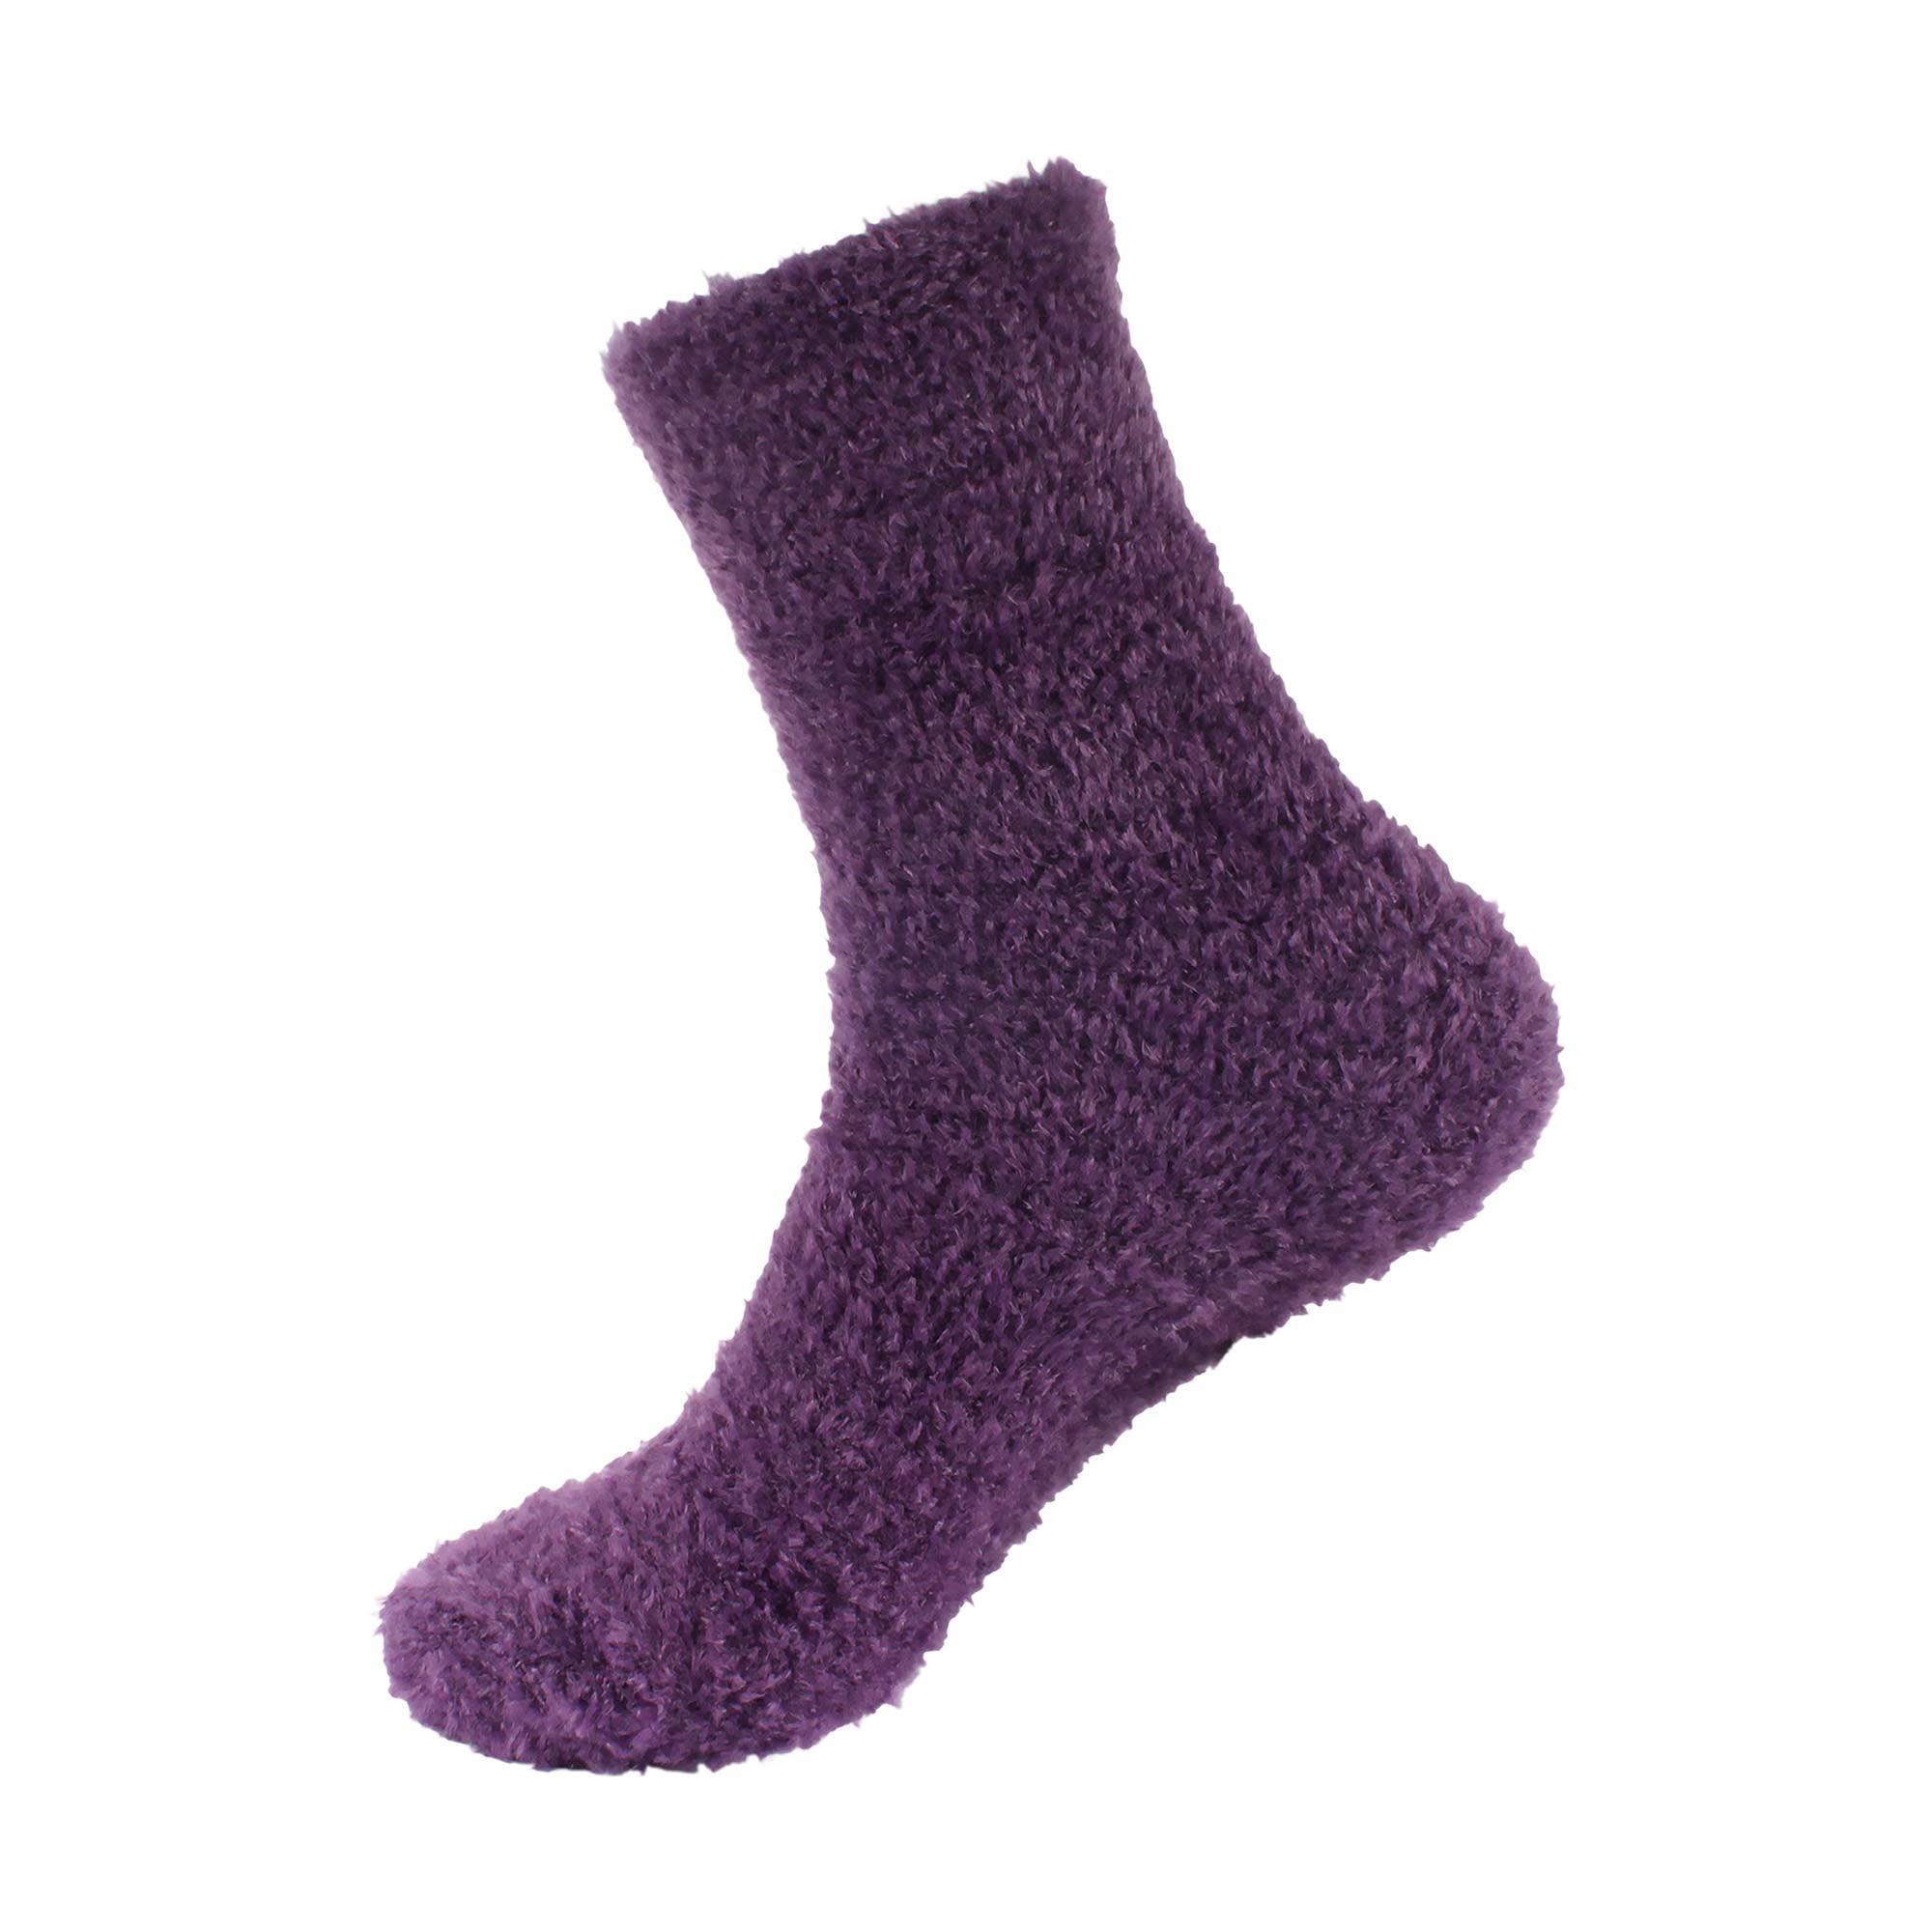 Women's Super Soft and Cozy Feather Light Fuzzy Home Socks - Pirate Purple  - 4 Pair Value Pack - Size 10-13 